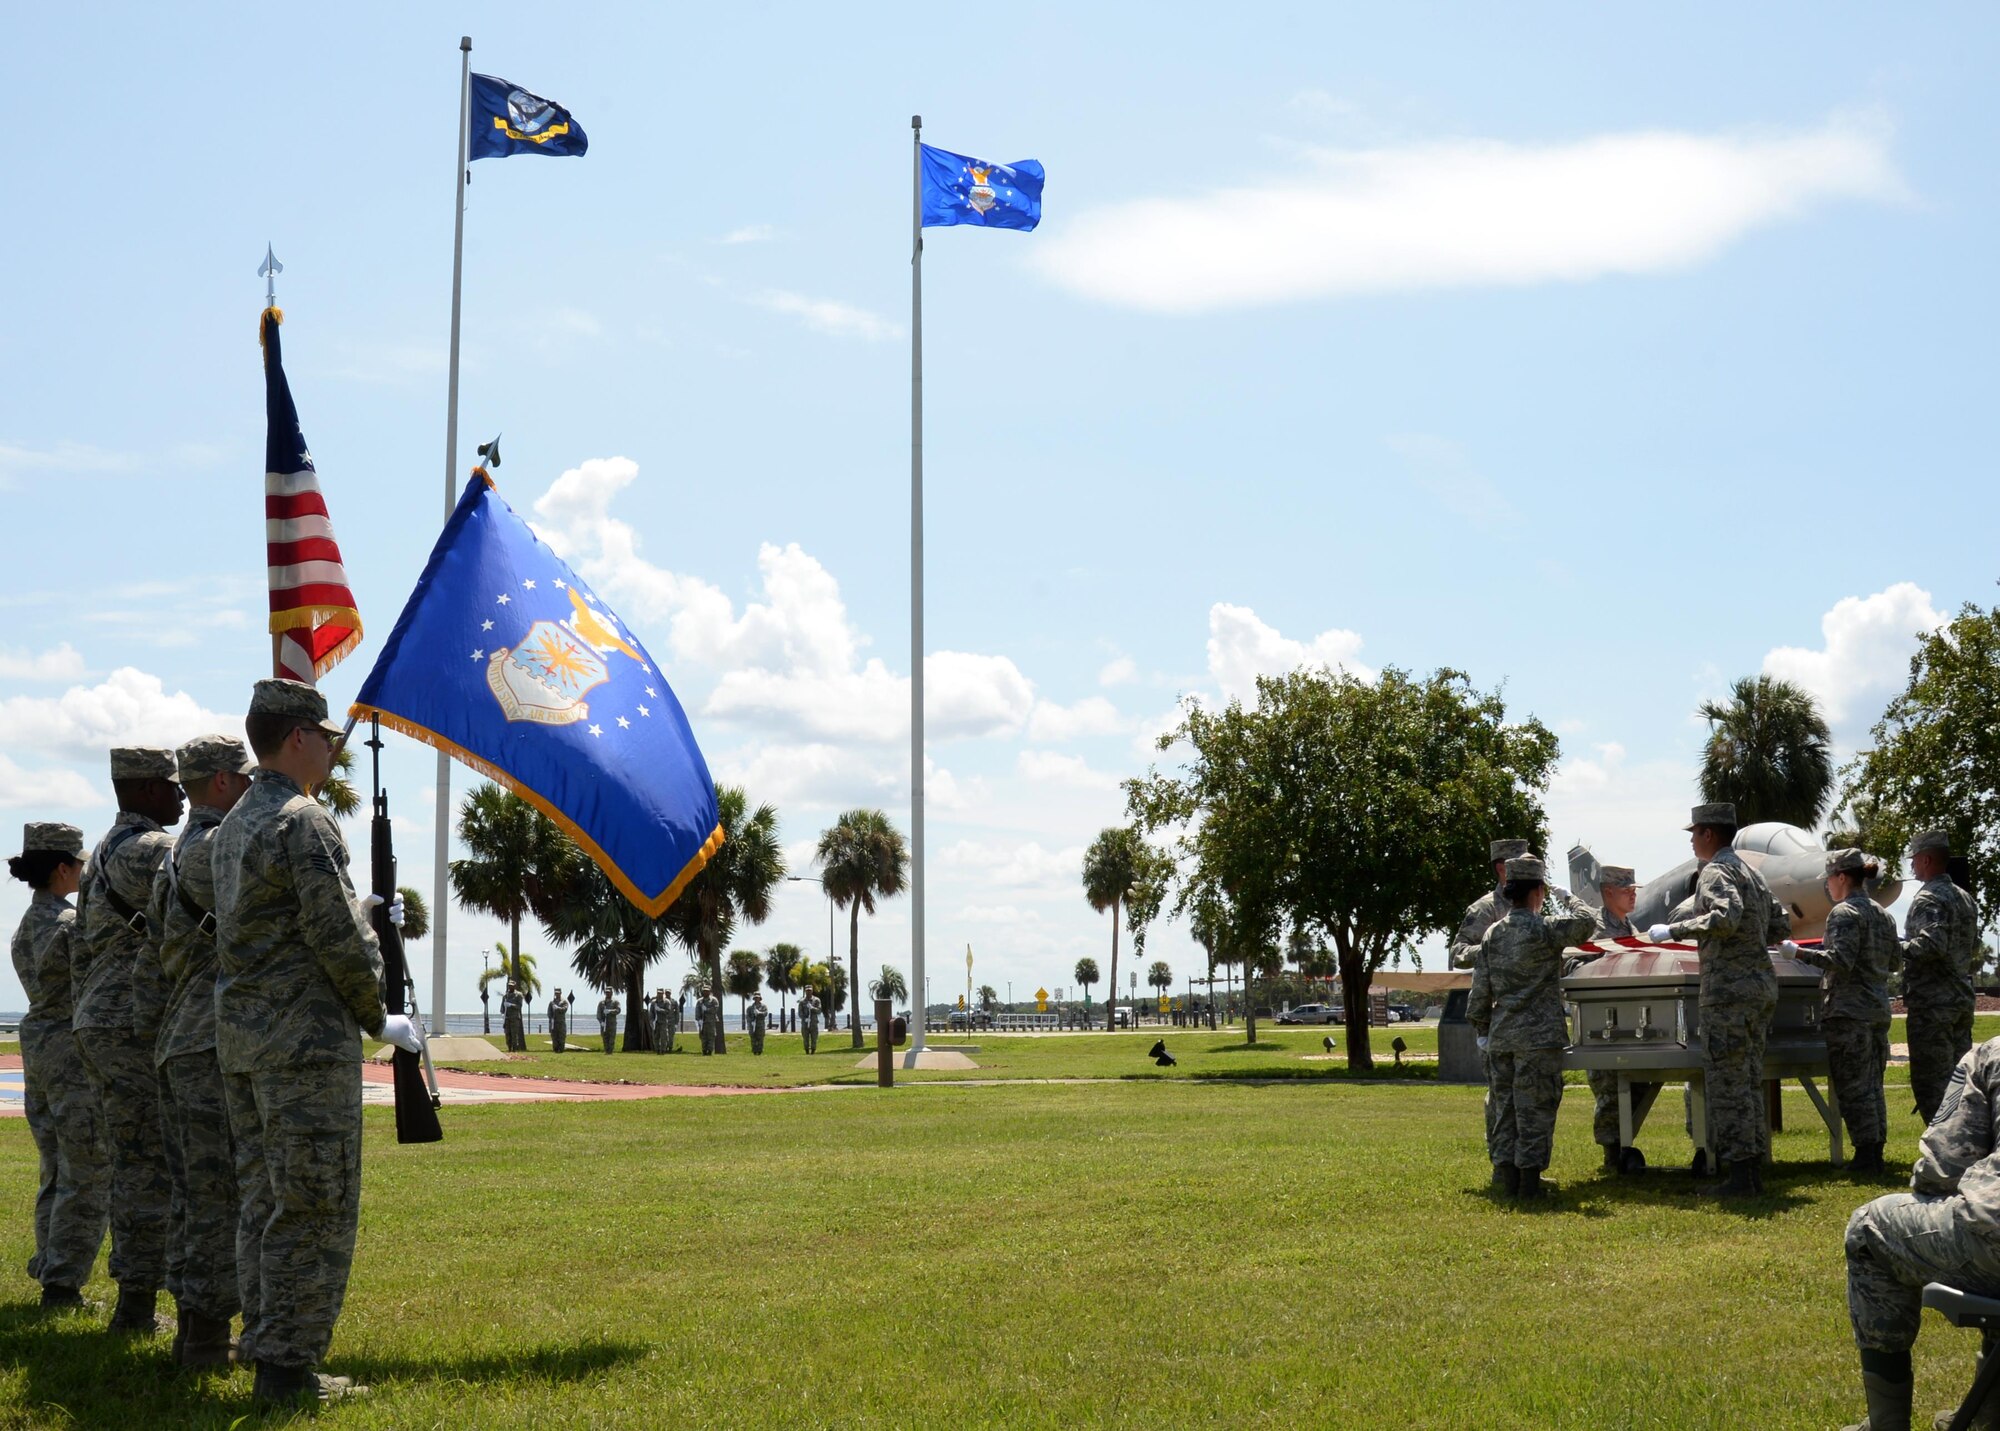 The MacDill Base Honor Guard practices a full-honors funeral during an honor guard graduation ceremony at MacDill Air Force Base, Fla., Sept. 6, 2016. The U.S. Air Force Honor Guard Mobile Training Team hosted the mock ceremony in order to showcase the proficiency the base honor guard gained during a seven-day training course. (U.S. Air Force photo by Tech. Sgt. Krystie Martinez)